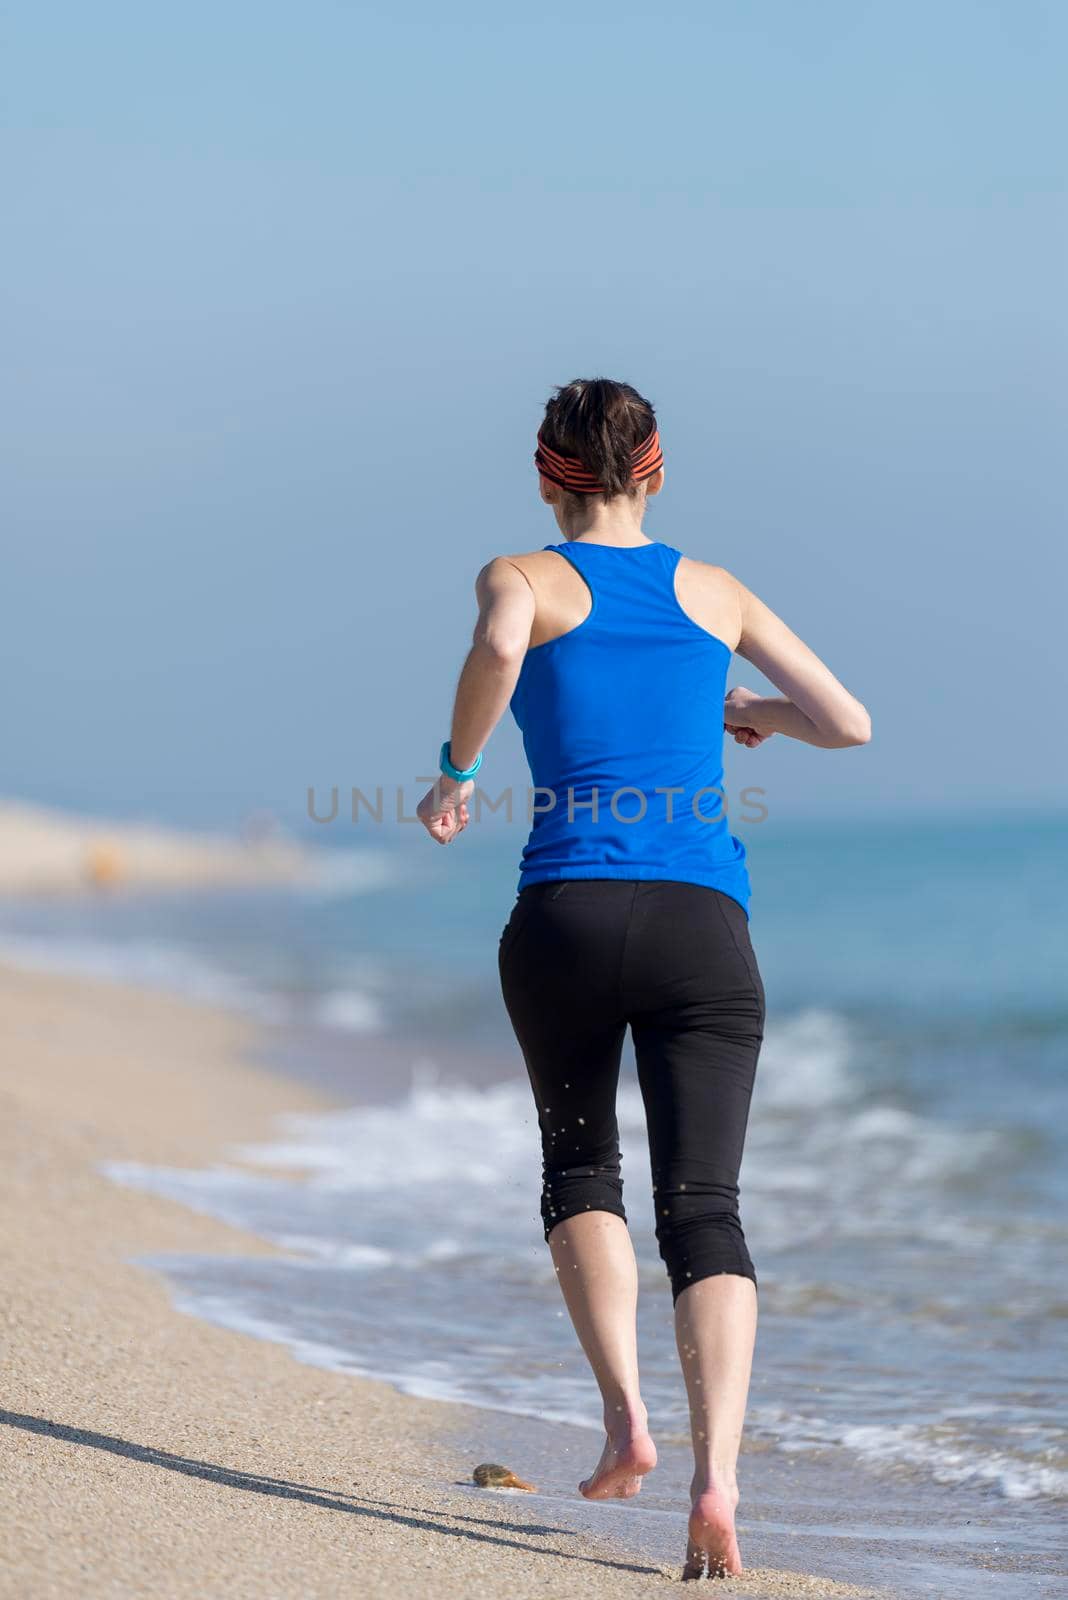 Rear view of women jogging on beach close to water by raferto1973